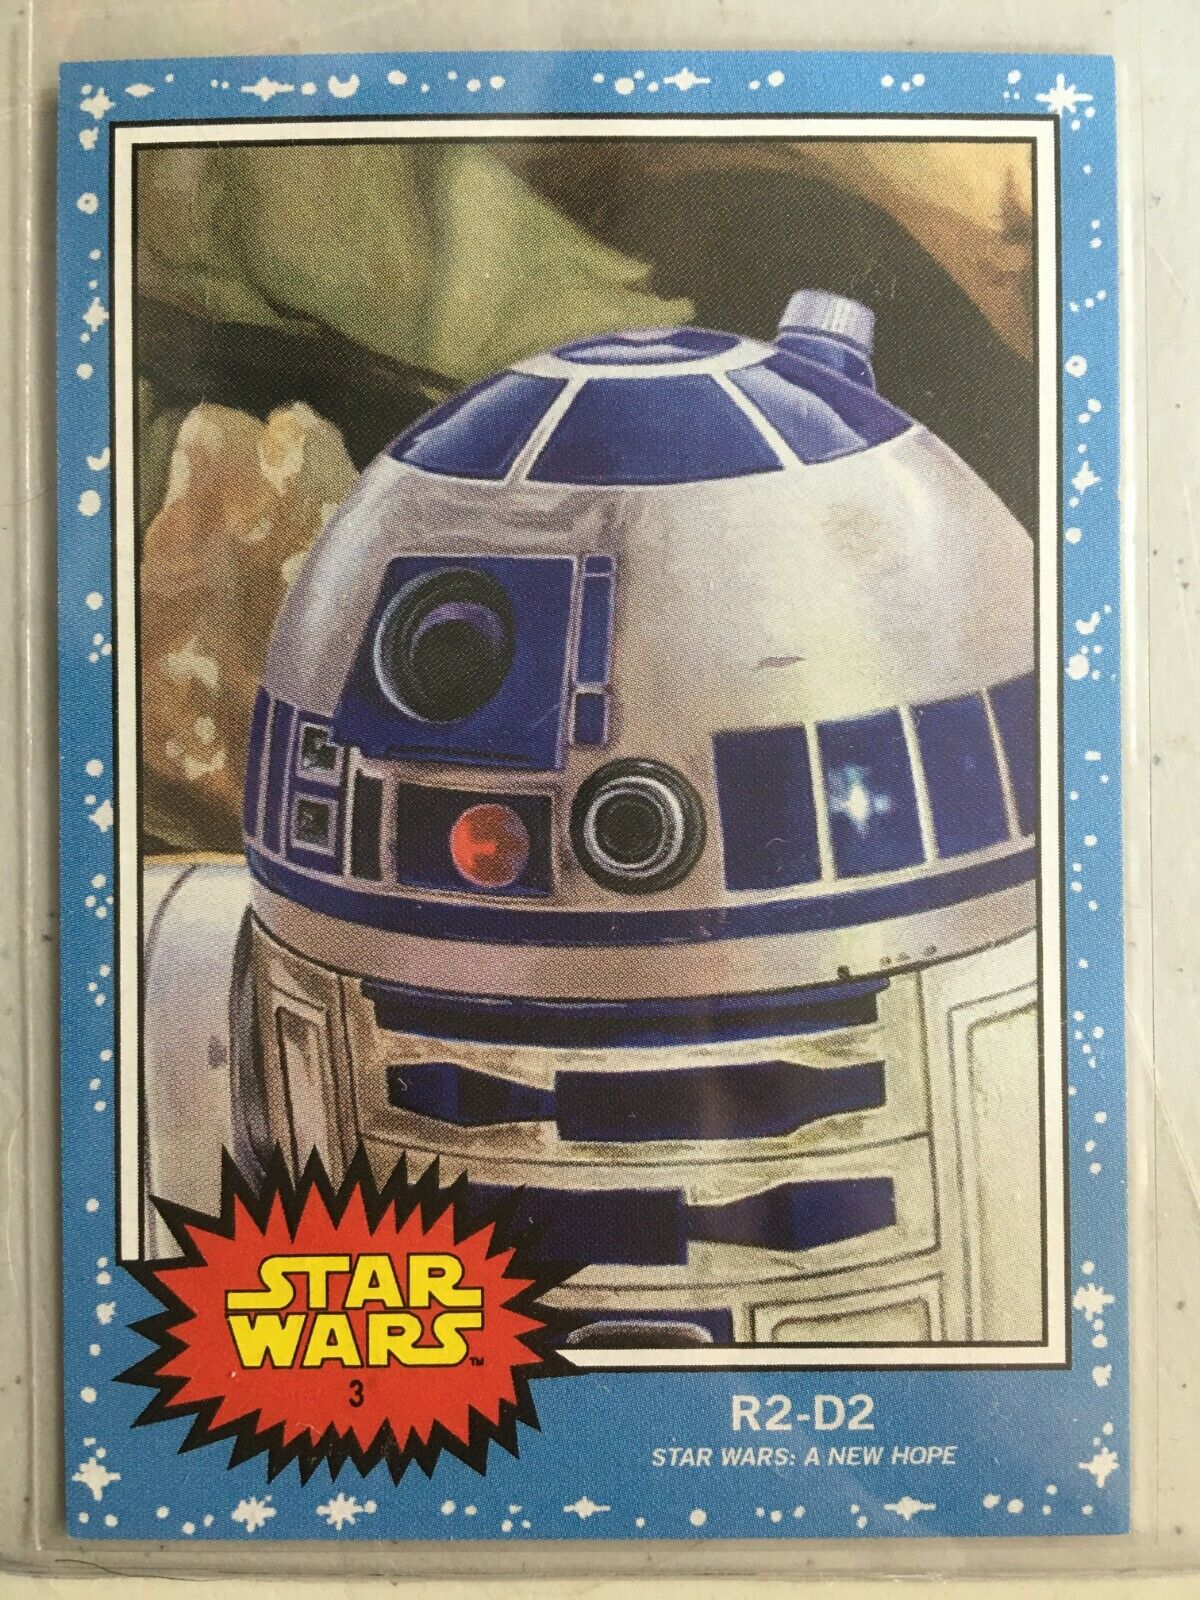 2019 Topps Star Wars  Living Set  #3  R2-D2  2,710 Total Printed  ONGOING SERIES